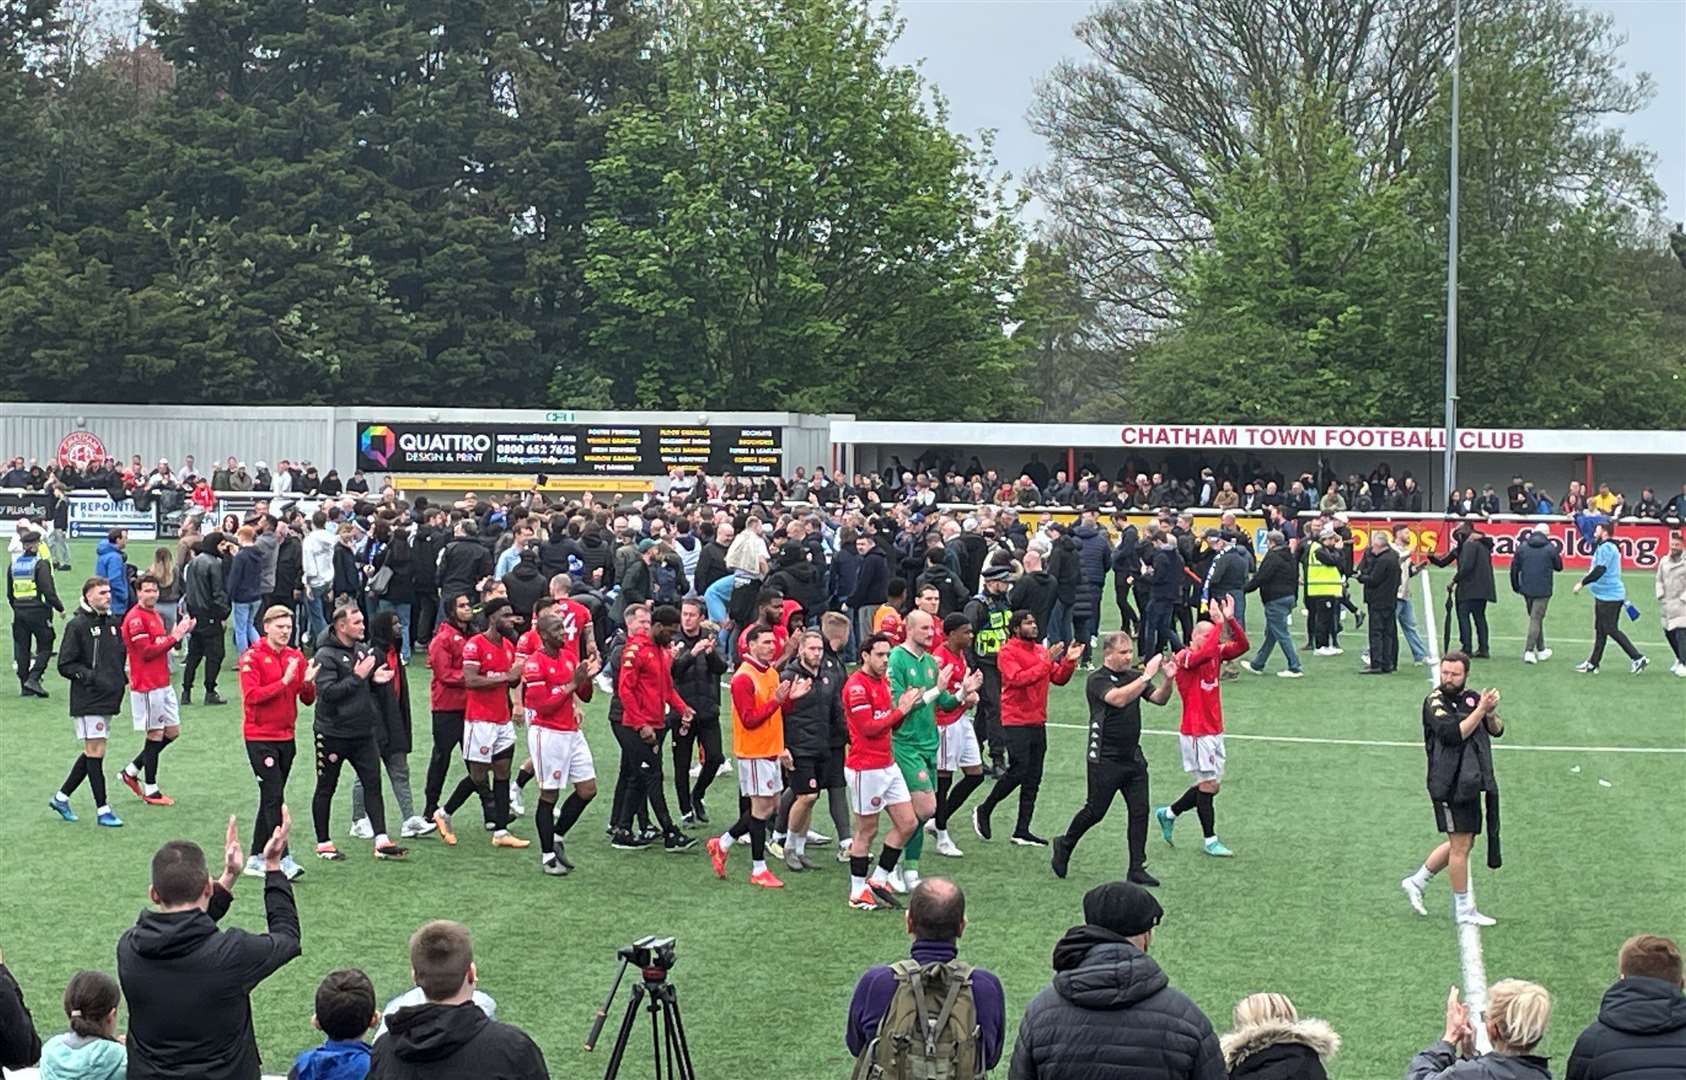 Chatham Town players and staff thank the fans as Enfield Town celebrate with their fans on the pitch